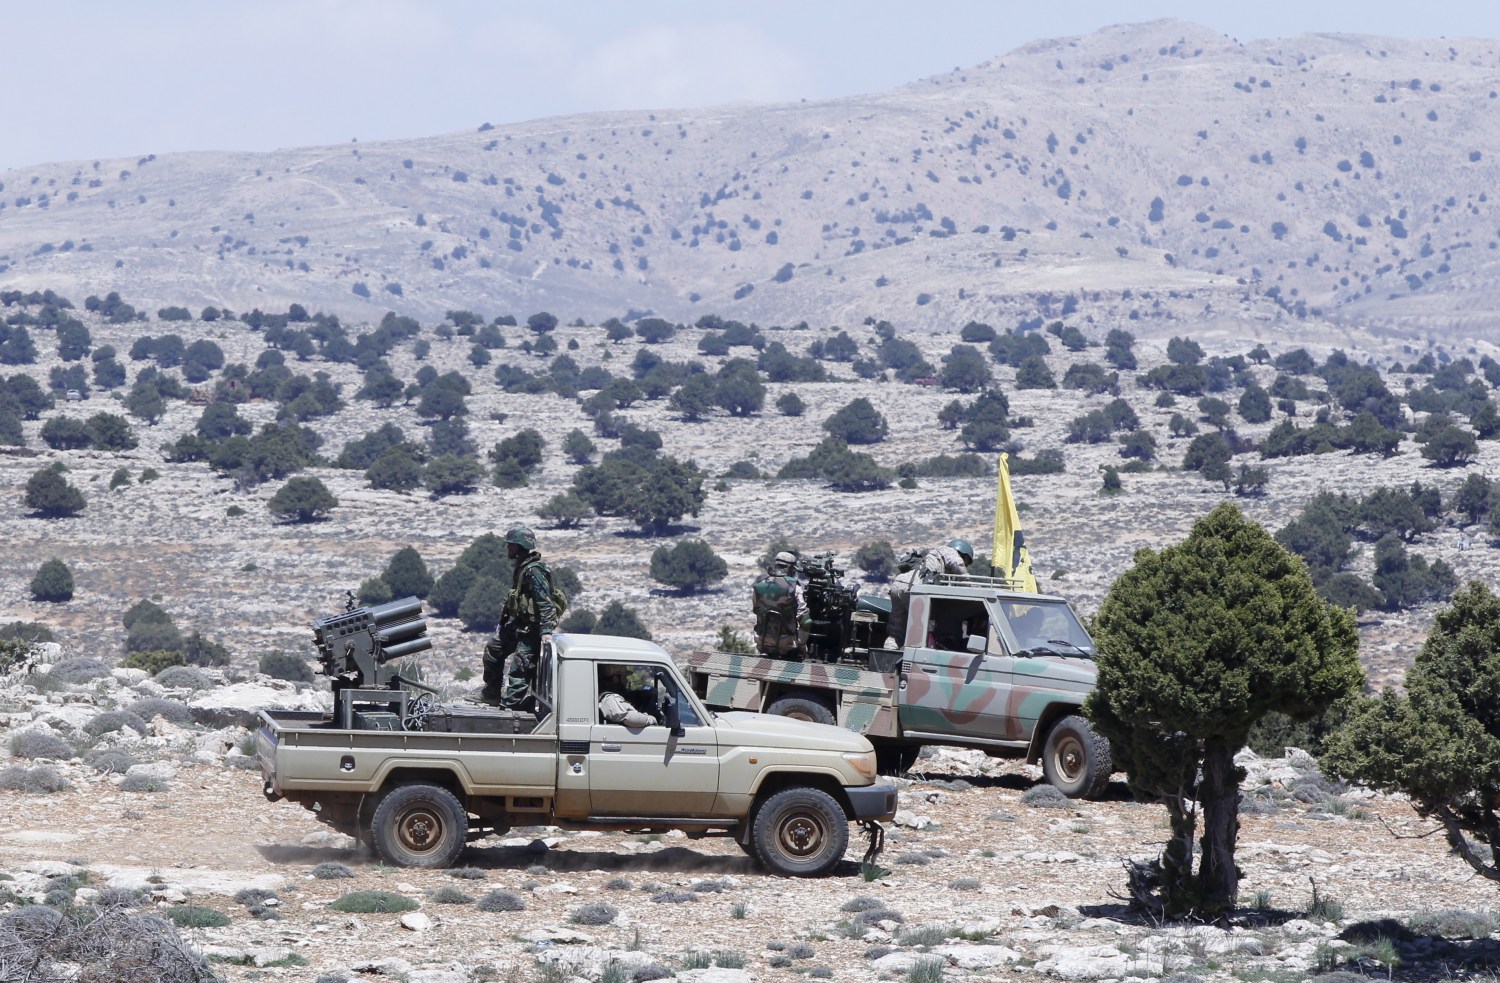 Lebanon's Hezbollah fighters sit on pick-up trucks mounted with weapons in Khashaat, in the Qalamoun region after they advanced in the area May 15, 2015. When Lebanon's Hezbollah first joined Syria's war on the side of President Bashar al-Assad, its role was a closely guarded secret. Today, as Hezbollah plants its flag in land won from rebels north of Damascus, its role could hardly be more public. Picture taken May 15, 2015. To match Insight MIDEAST-CRISIS/SYRIA REUTERS/Mohamed Azakir